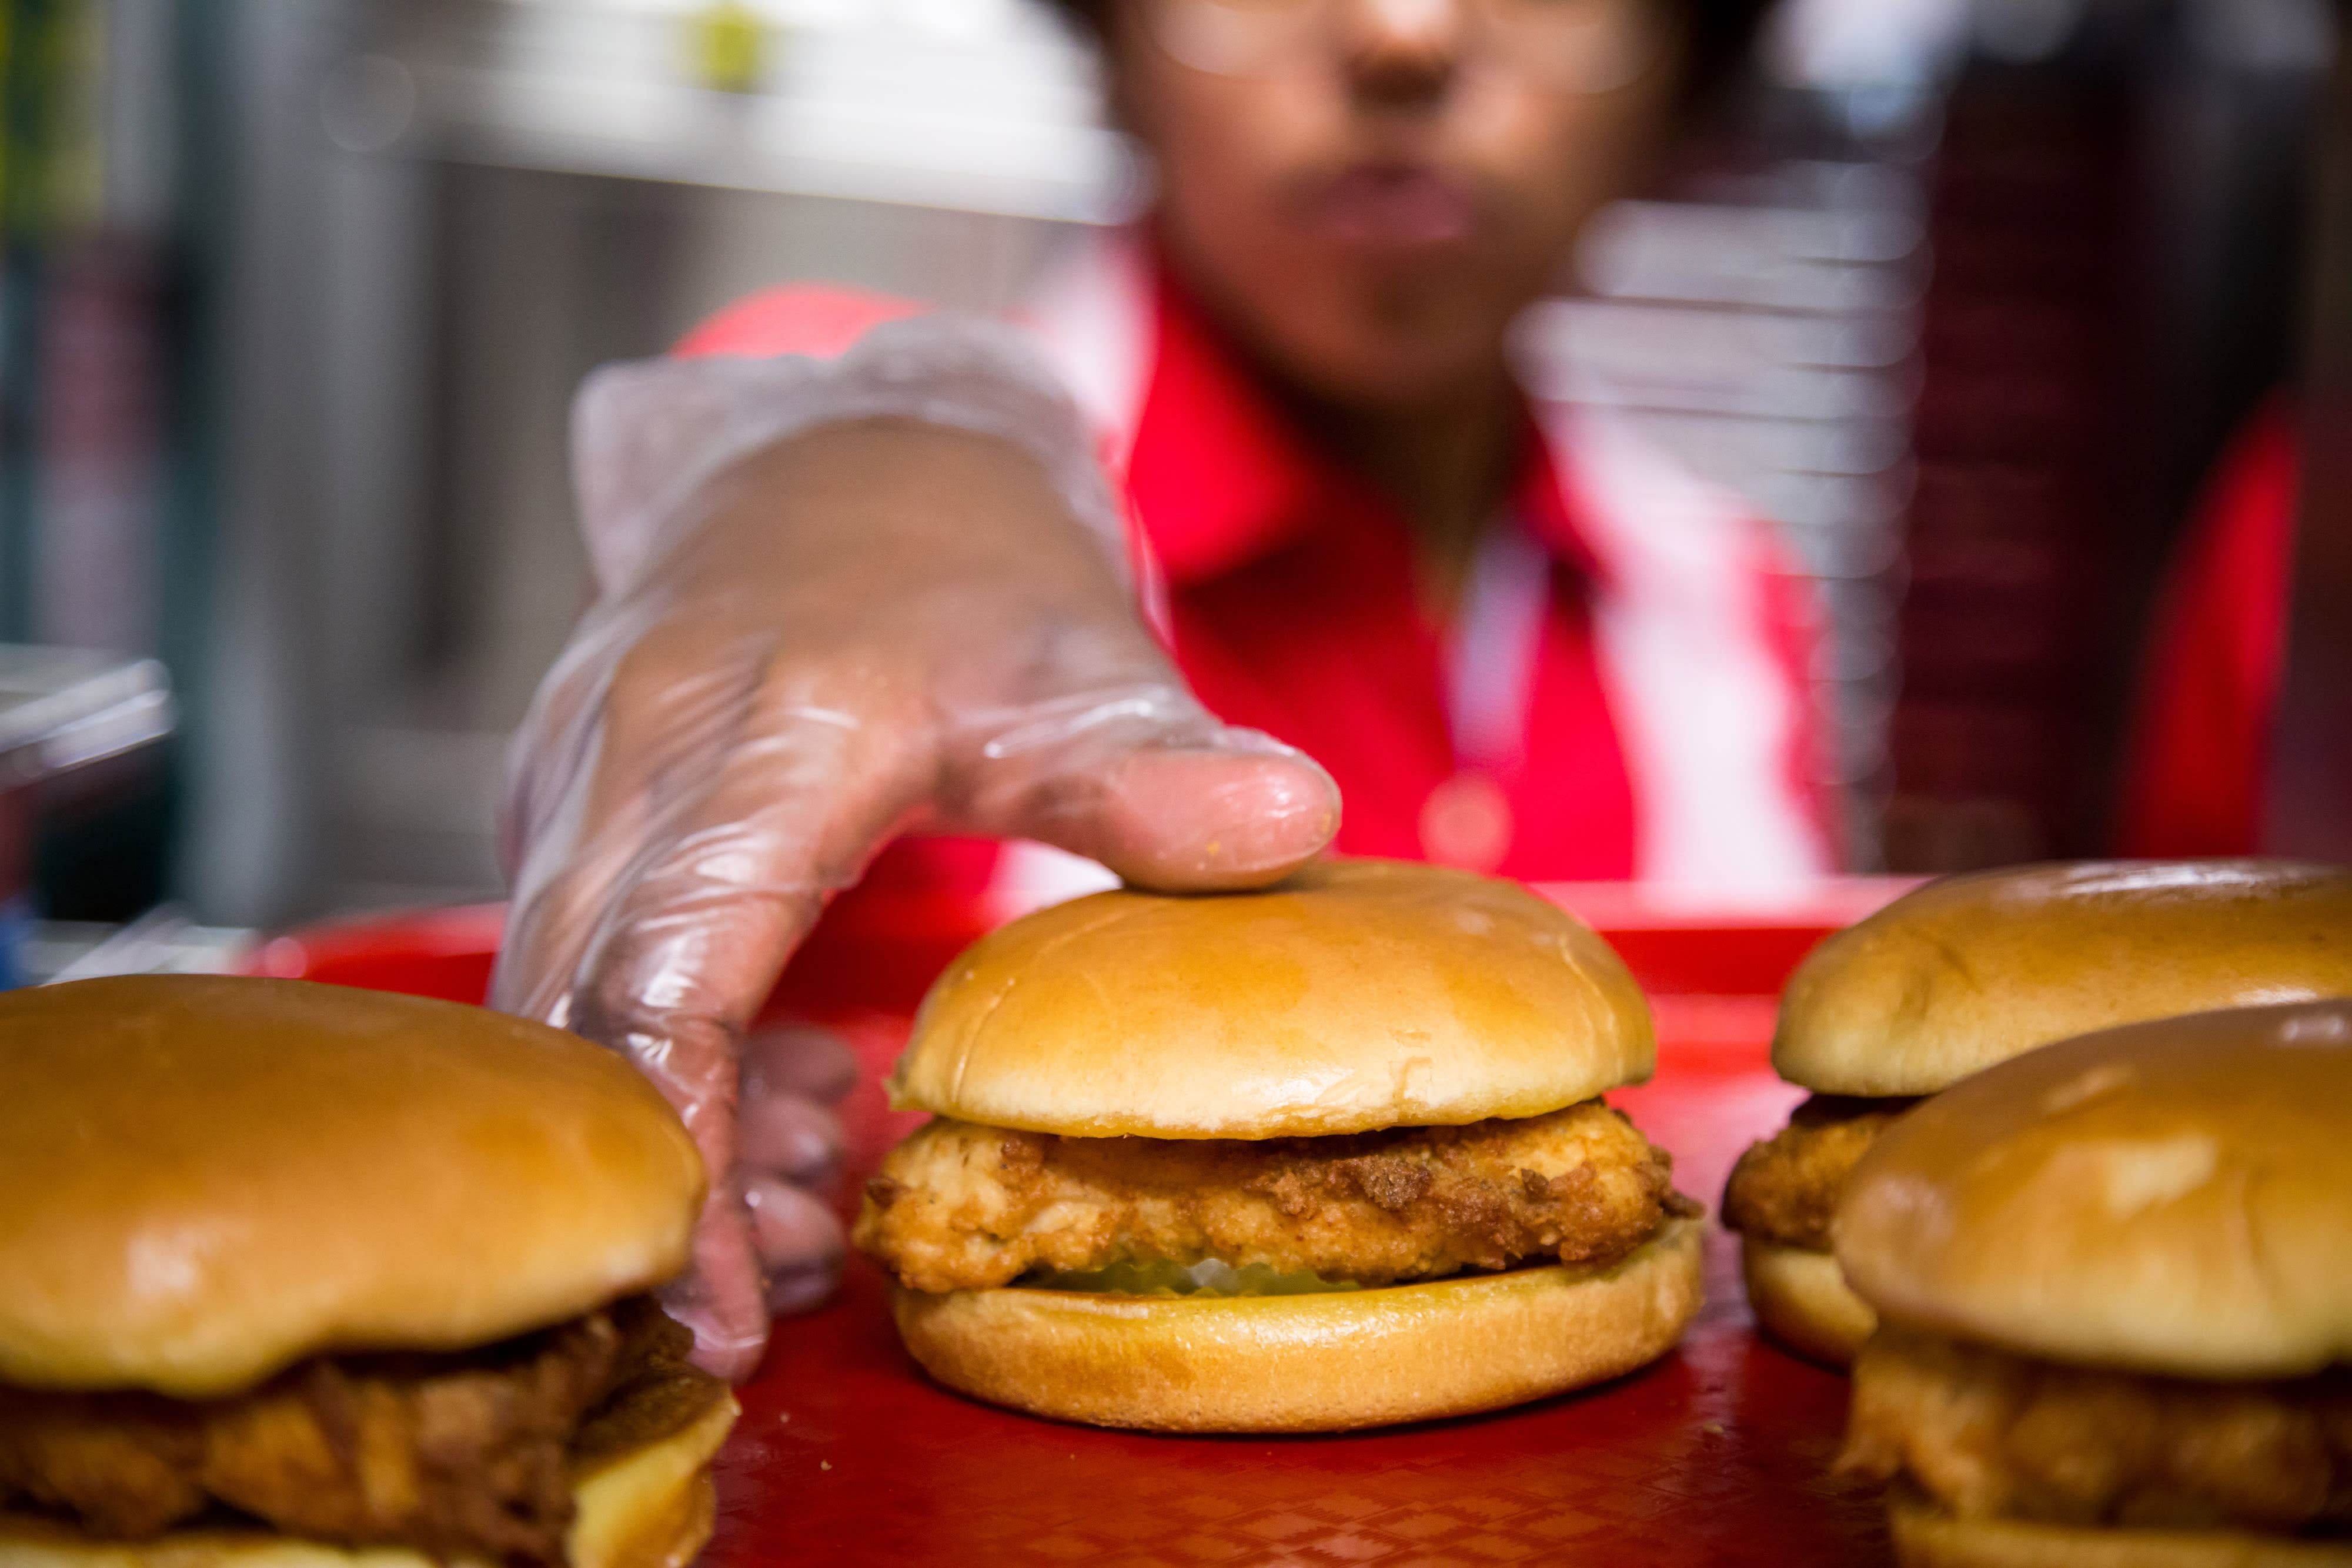 How Chick-fil-A has outran competitors and criticism